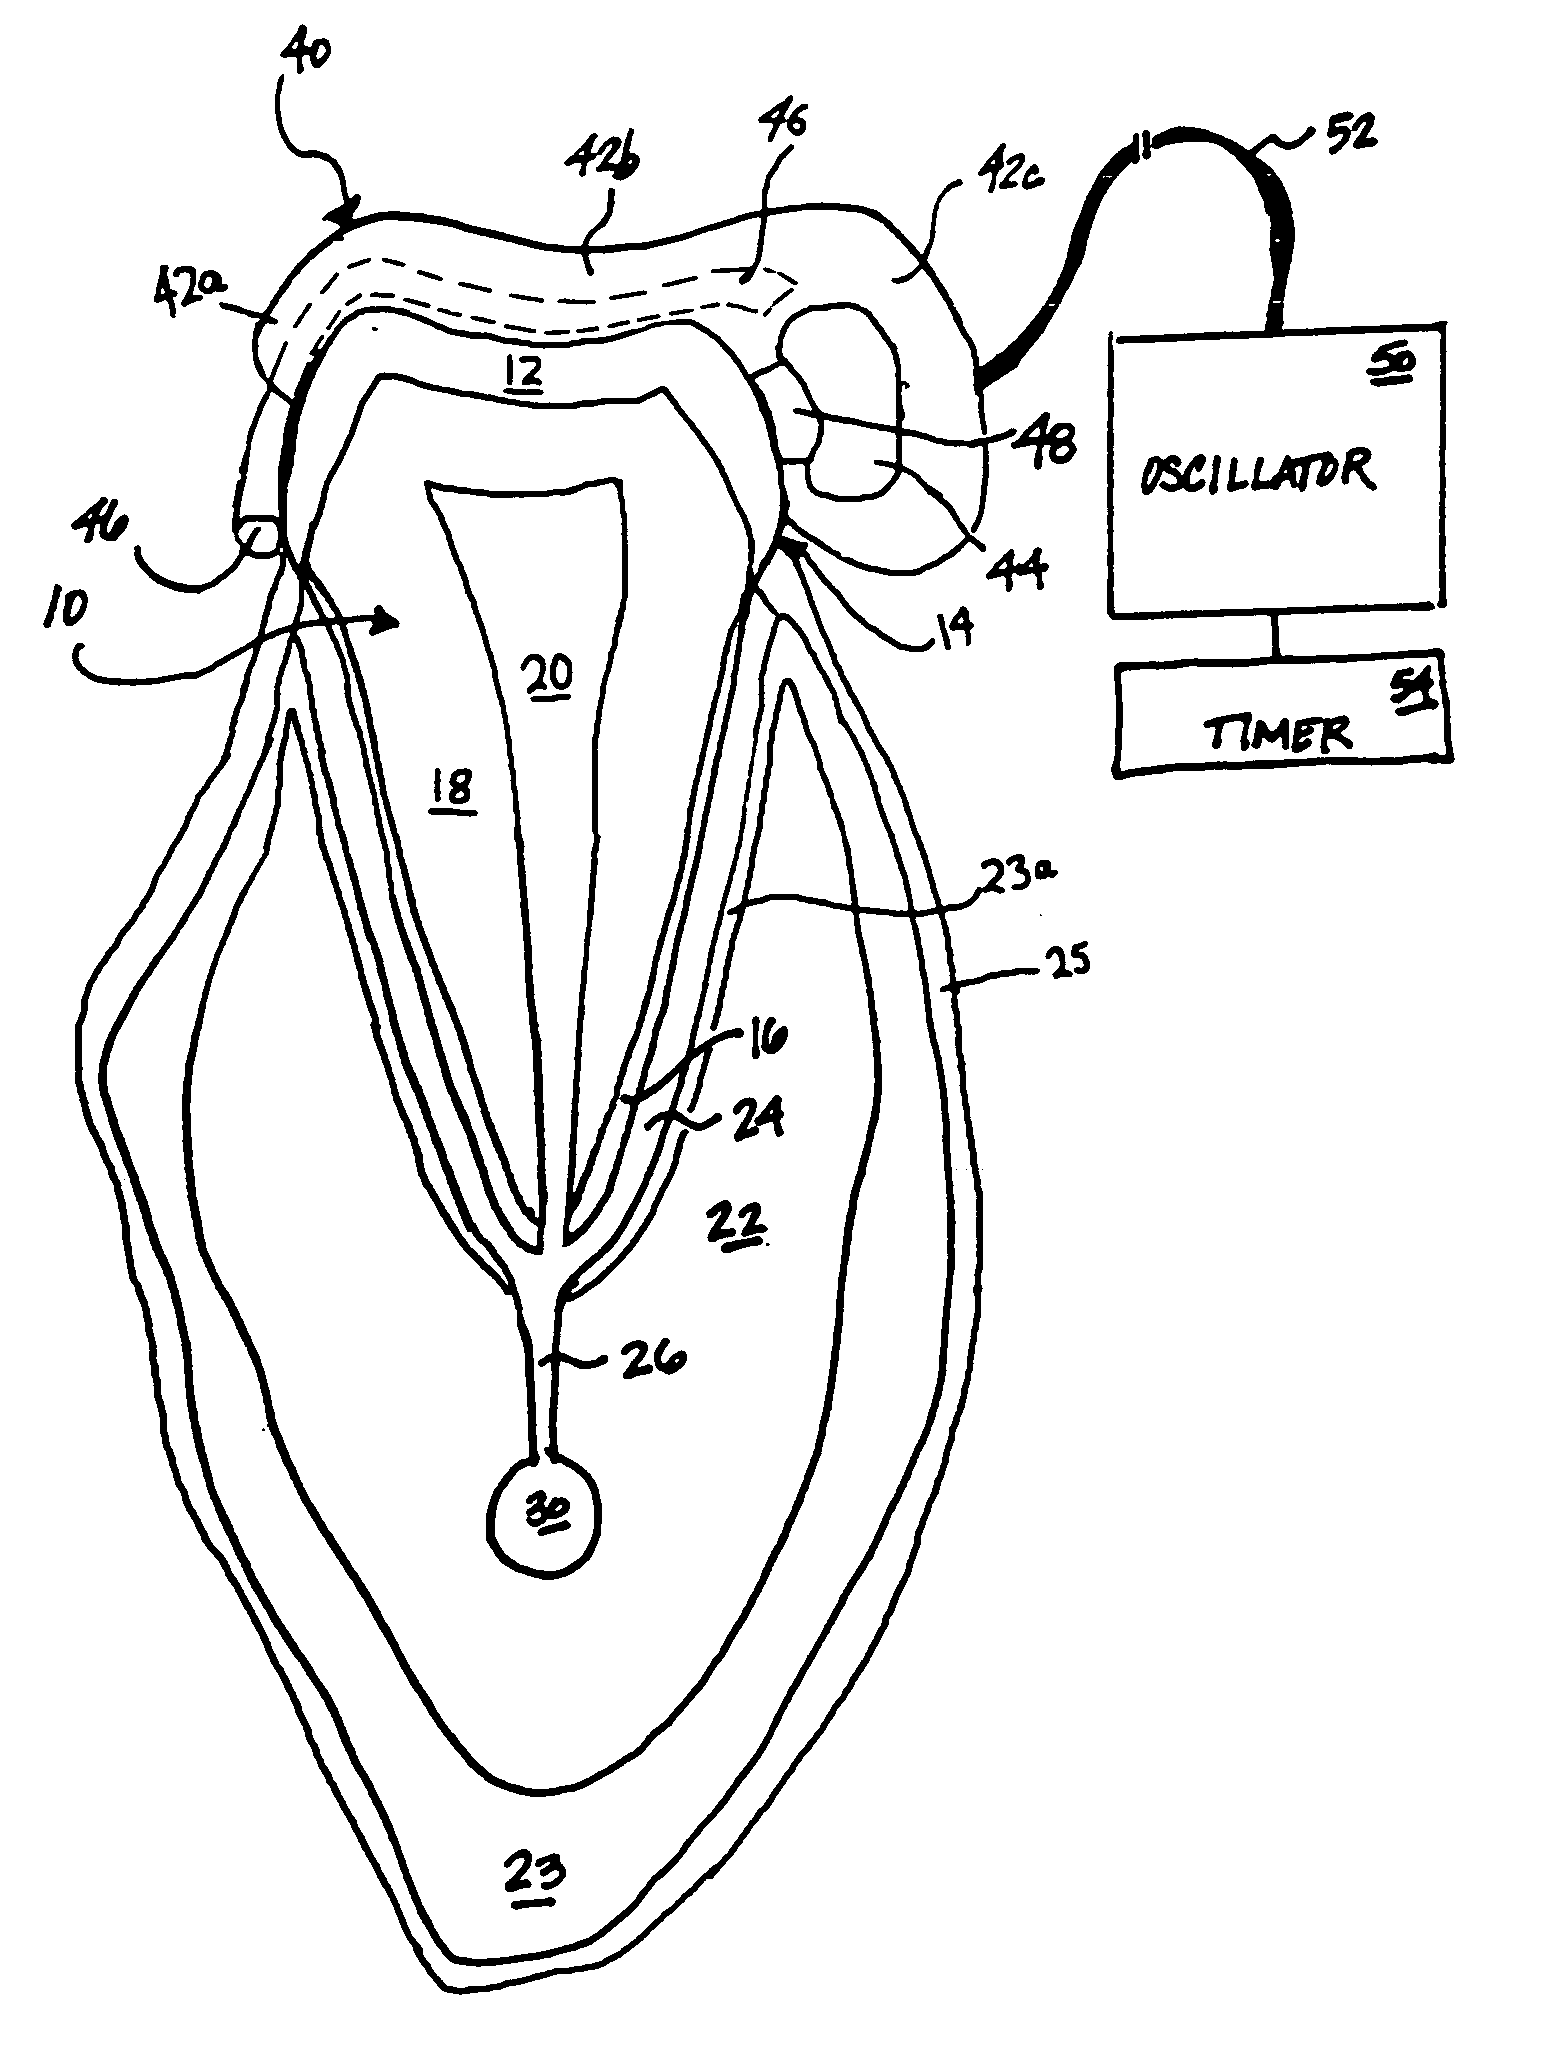 Apparatus and method for intra-oral stimulation of the trigeminal nerve